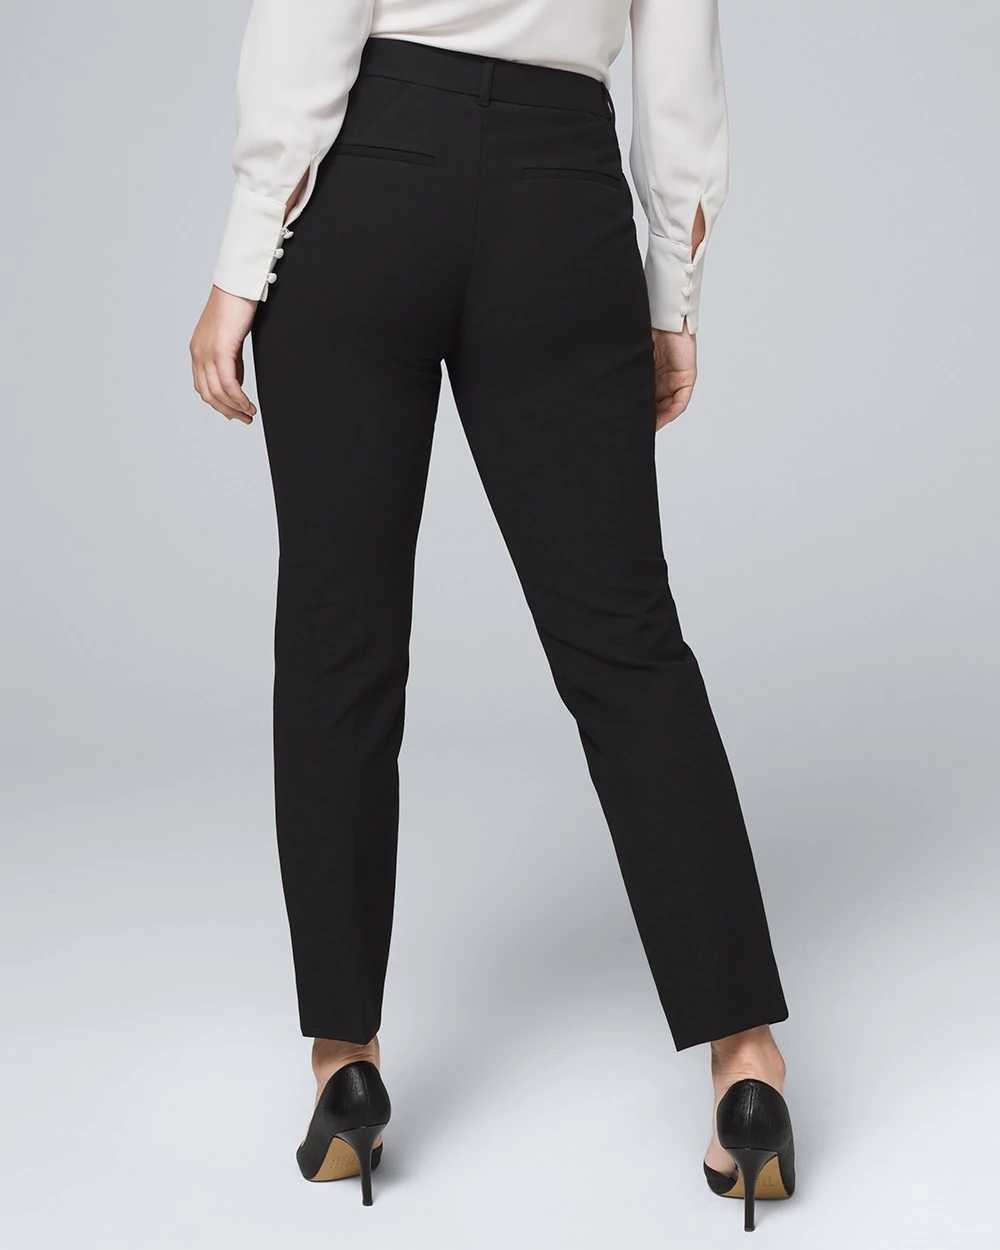 Curvy-Fit Comfort Stretch Slim Ankle Pants click to view larger image.